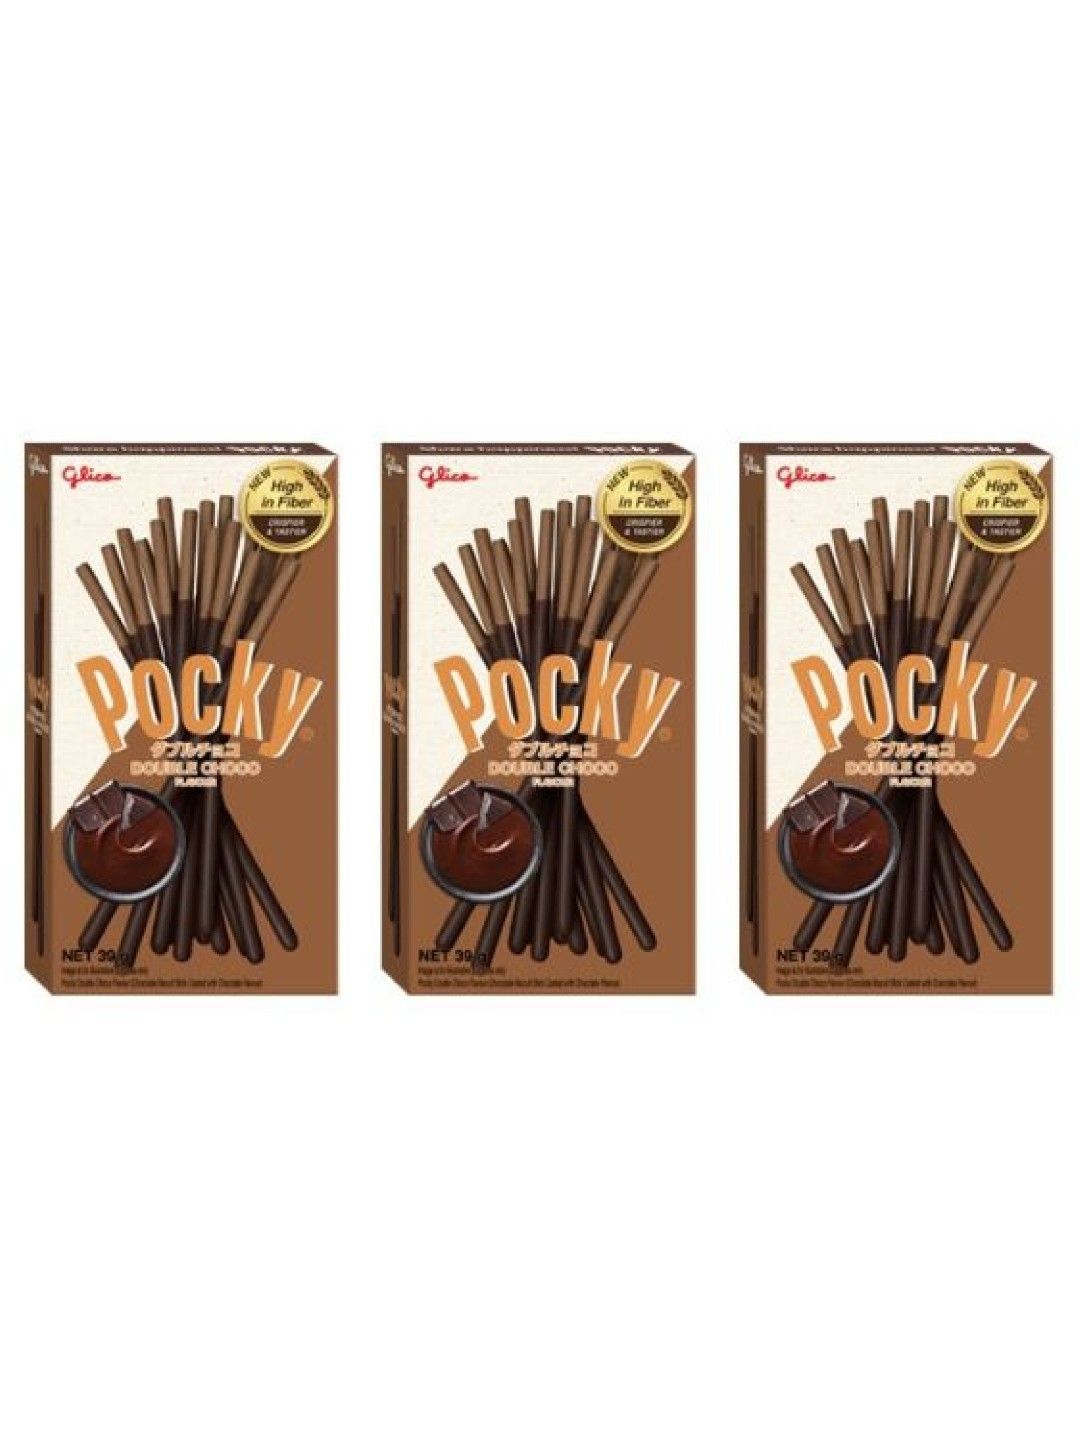 Pocky Double Choco Biscuit Sticks (Bundle of 3) (No Color- Image 1)